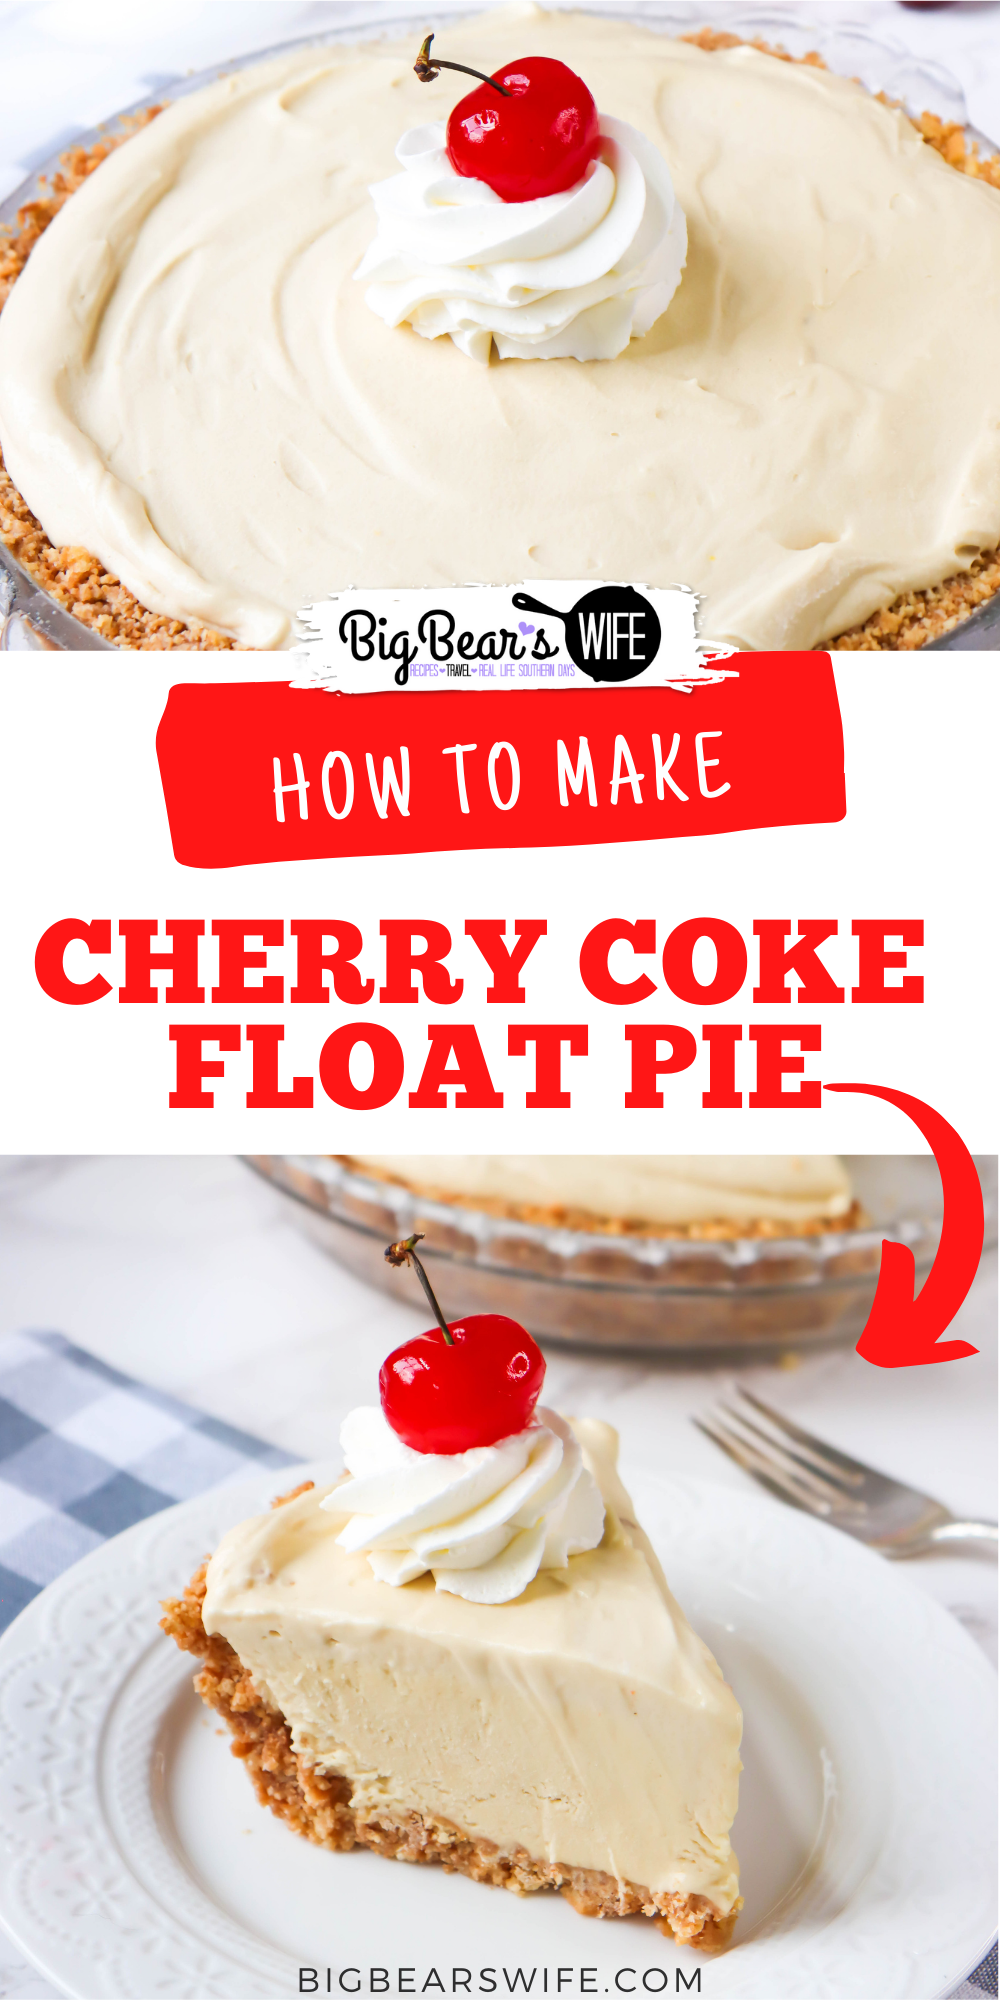 If you love ice cream floats then you're going to want to grab this recipe for homemade Cherry Coke Float Pie! This frozen desserts lets you slice up your favorite ice cream float for the perfect summer dessert!  via @bigbearswife